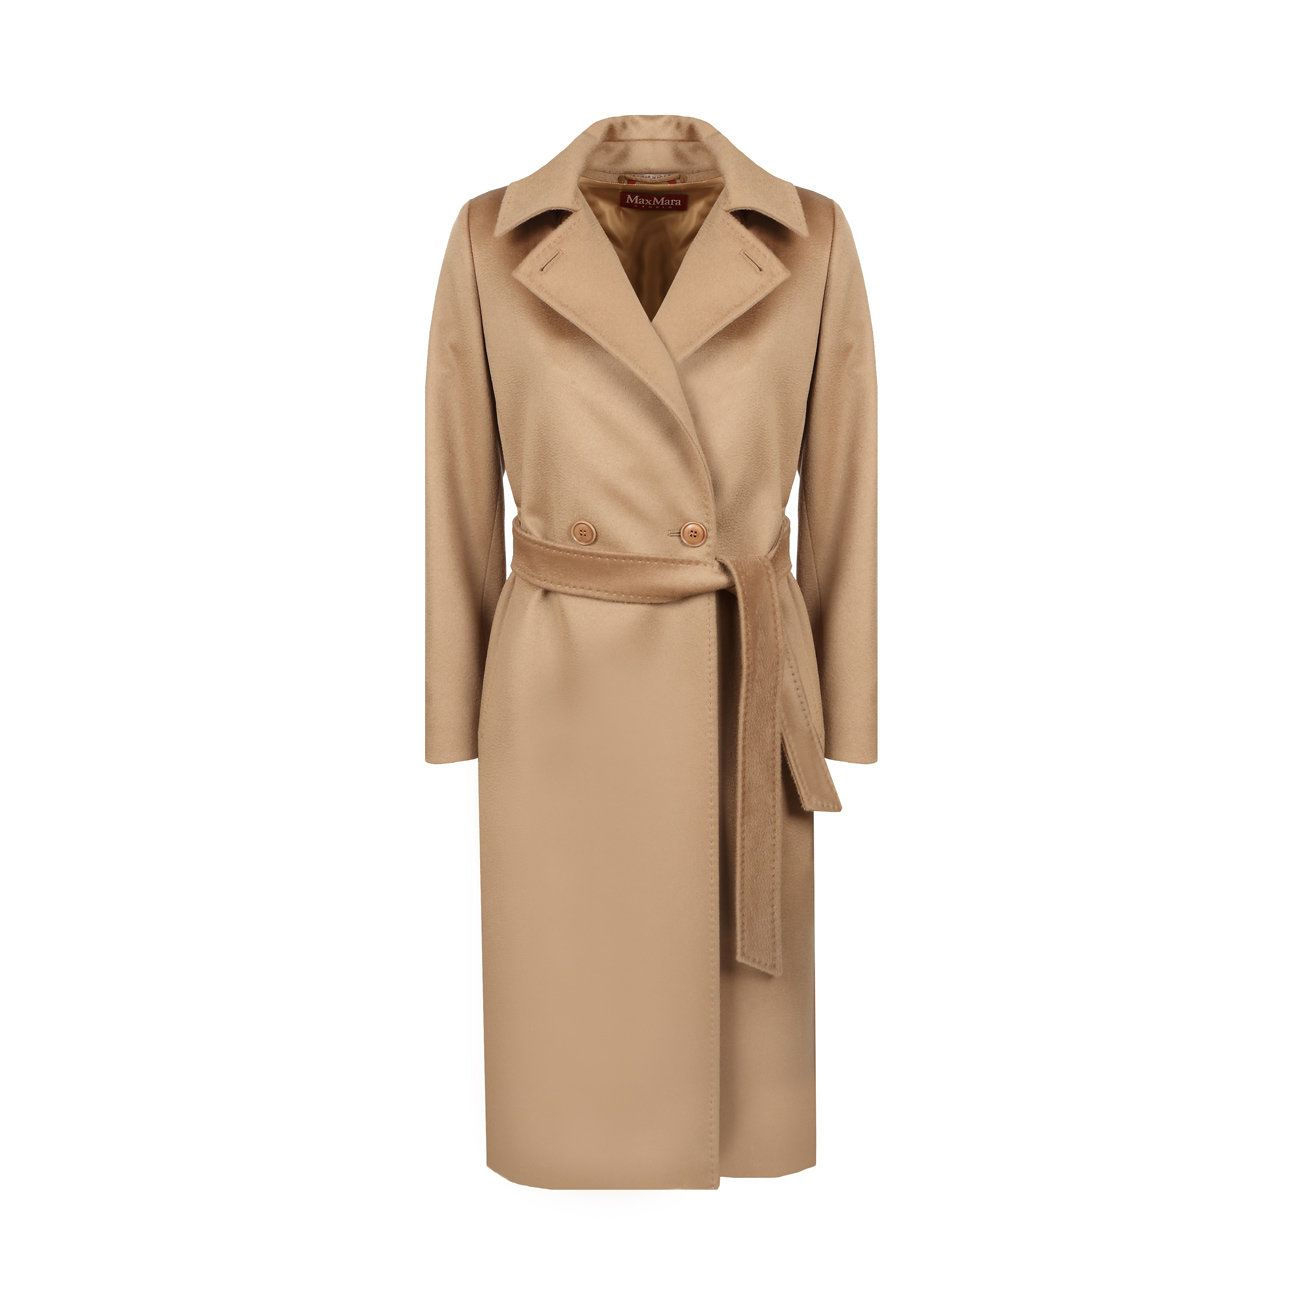 BCOLLAG LONG COAT WITH BELT Woman Camel 2101429595493